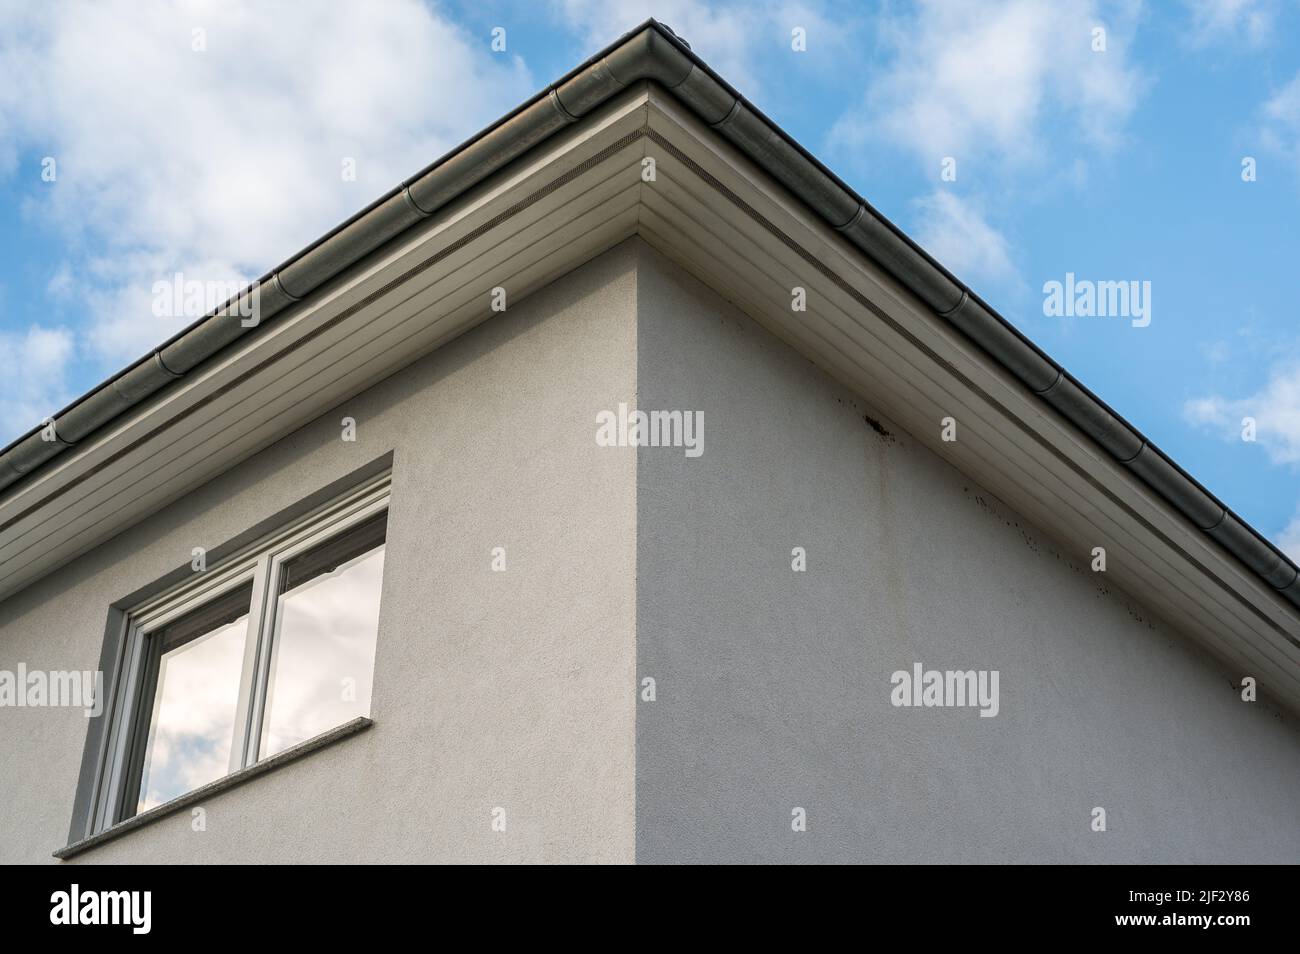 Upper floor of a white plastered house with roof box and double window Stock Photo